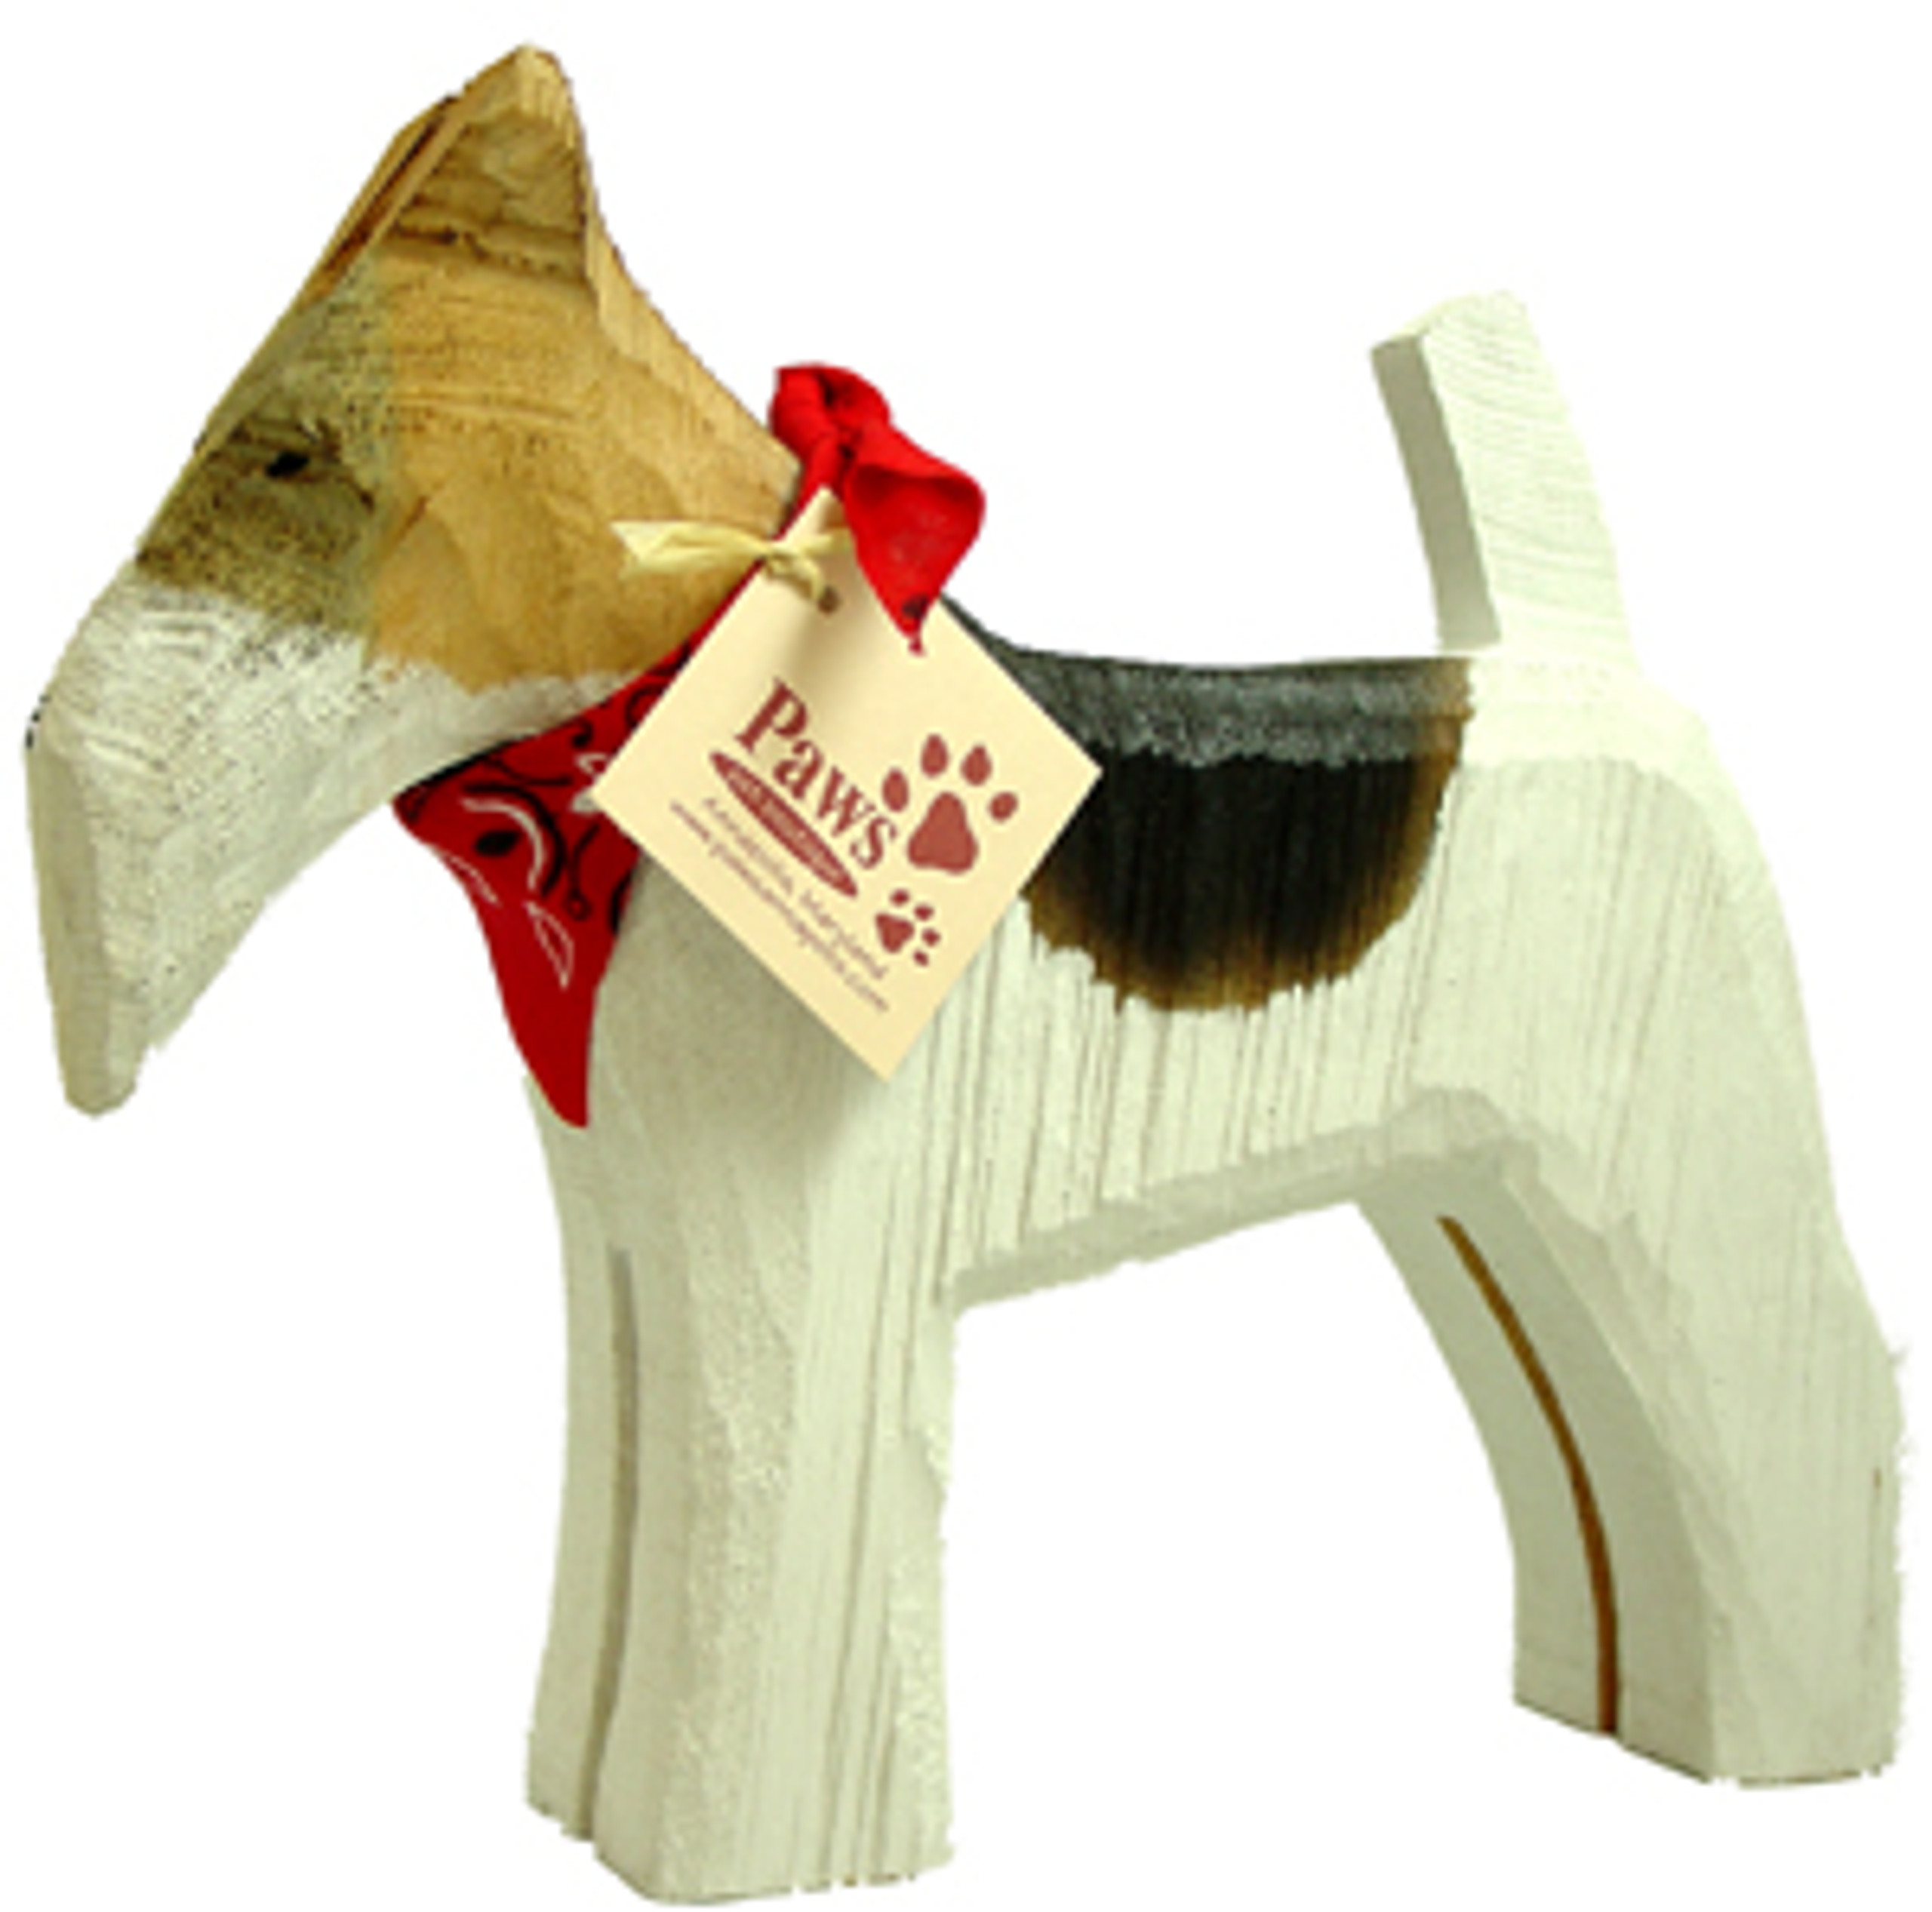 Carved Wooden Airedales - Paws pet boutique